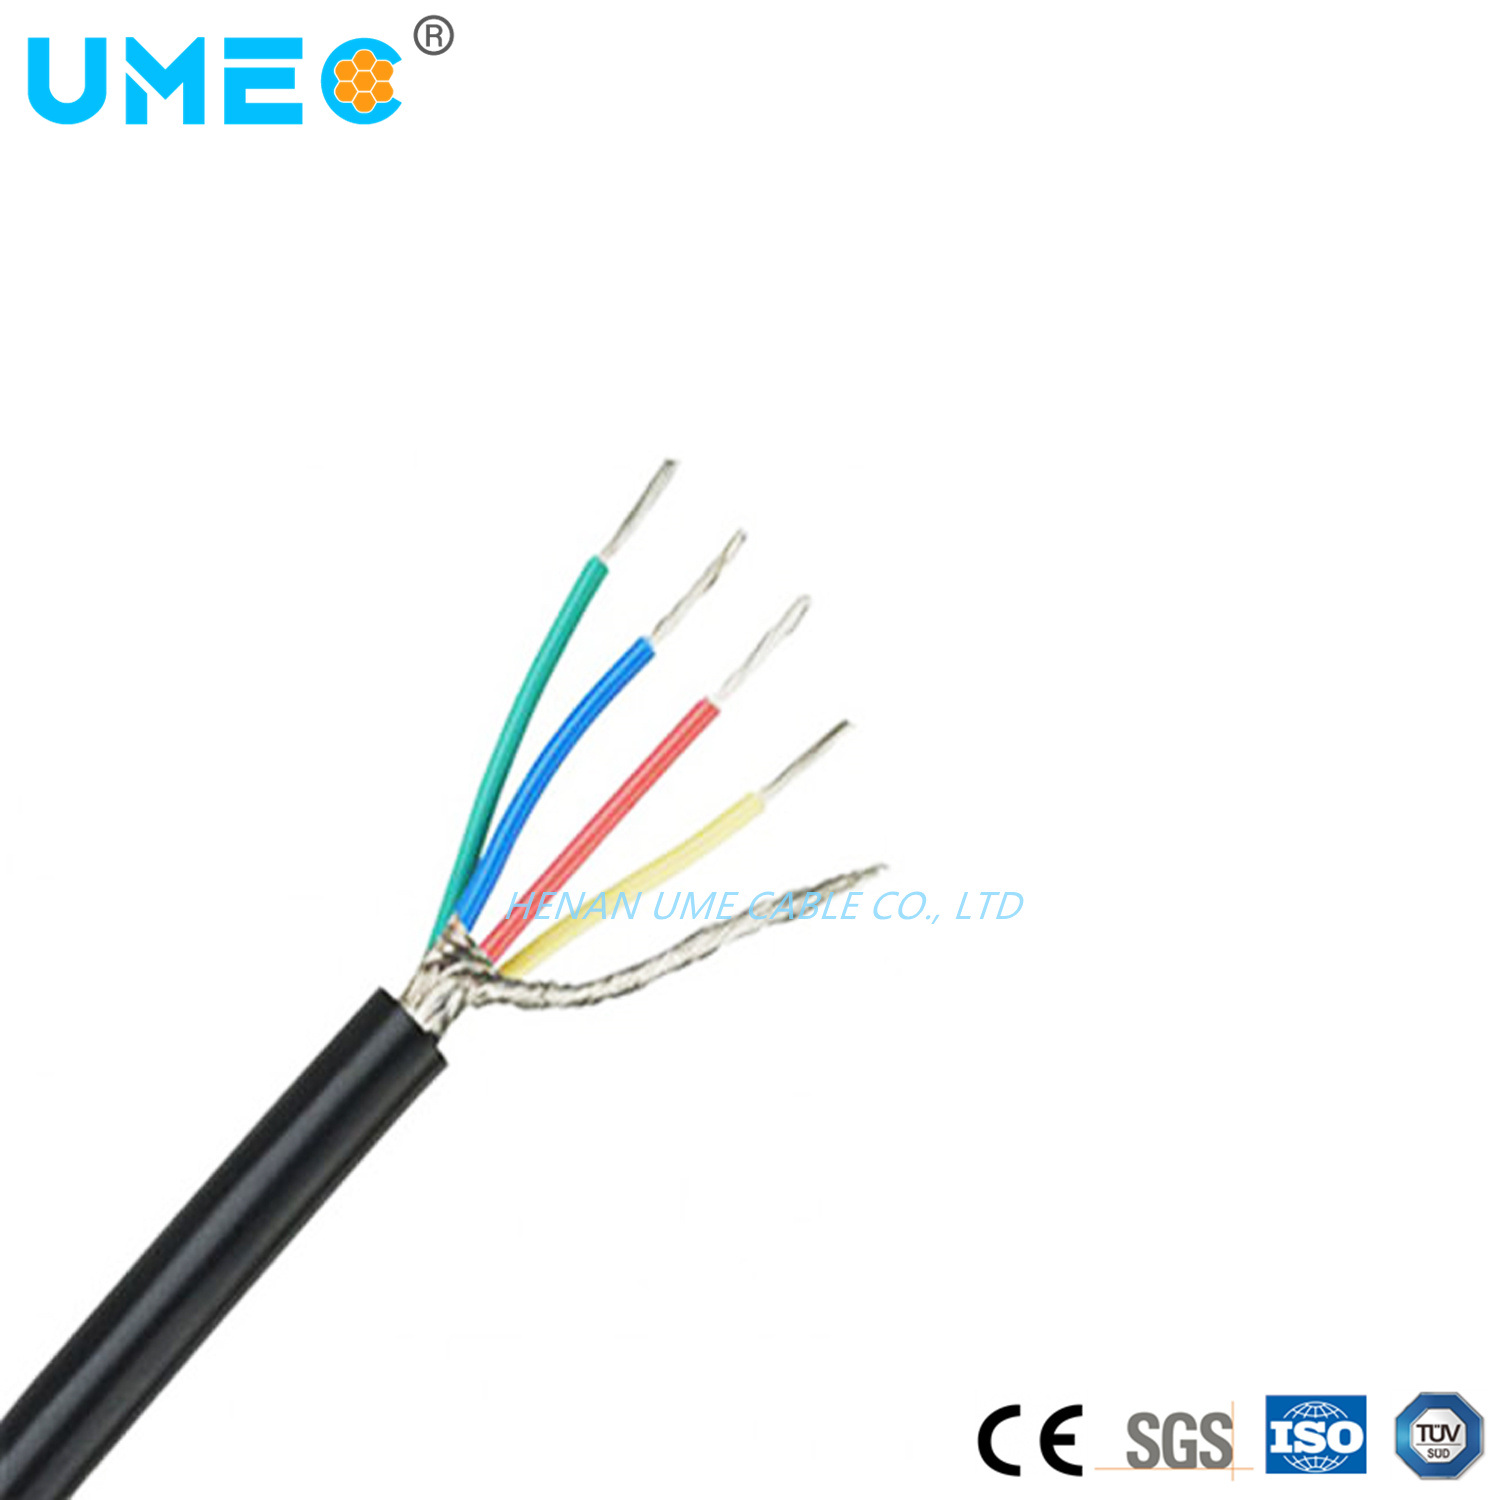 Electrical Computer Cable 300/500V 1X2X0.5 1X2X0.75 1X2X1.0 1X2X1.5mm2 Computer Cable